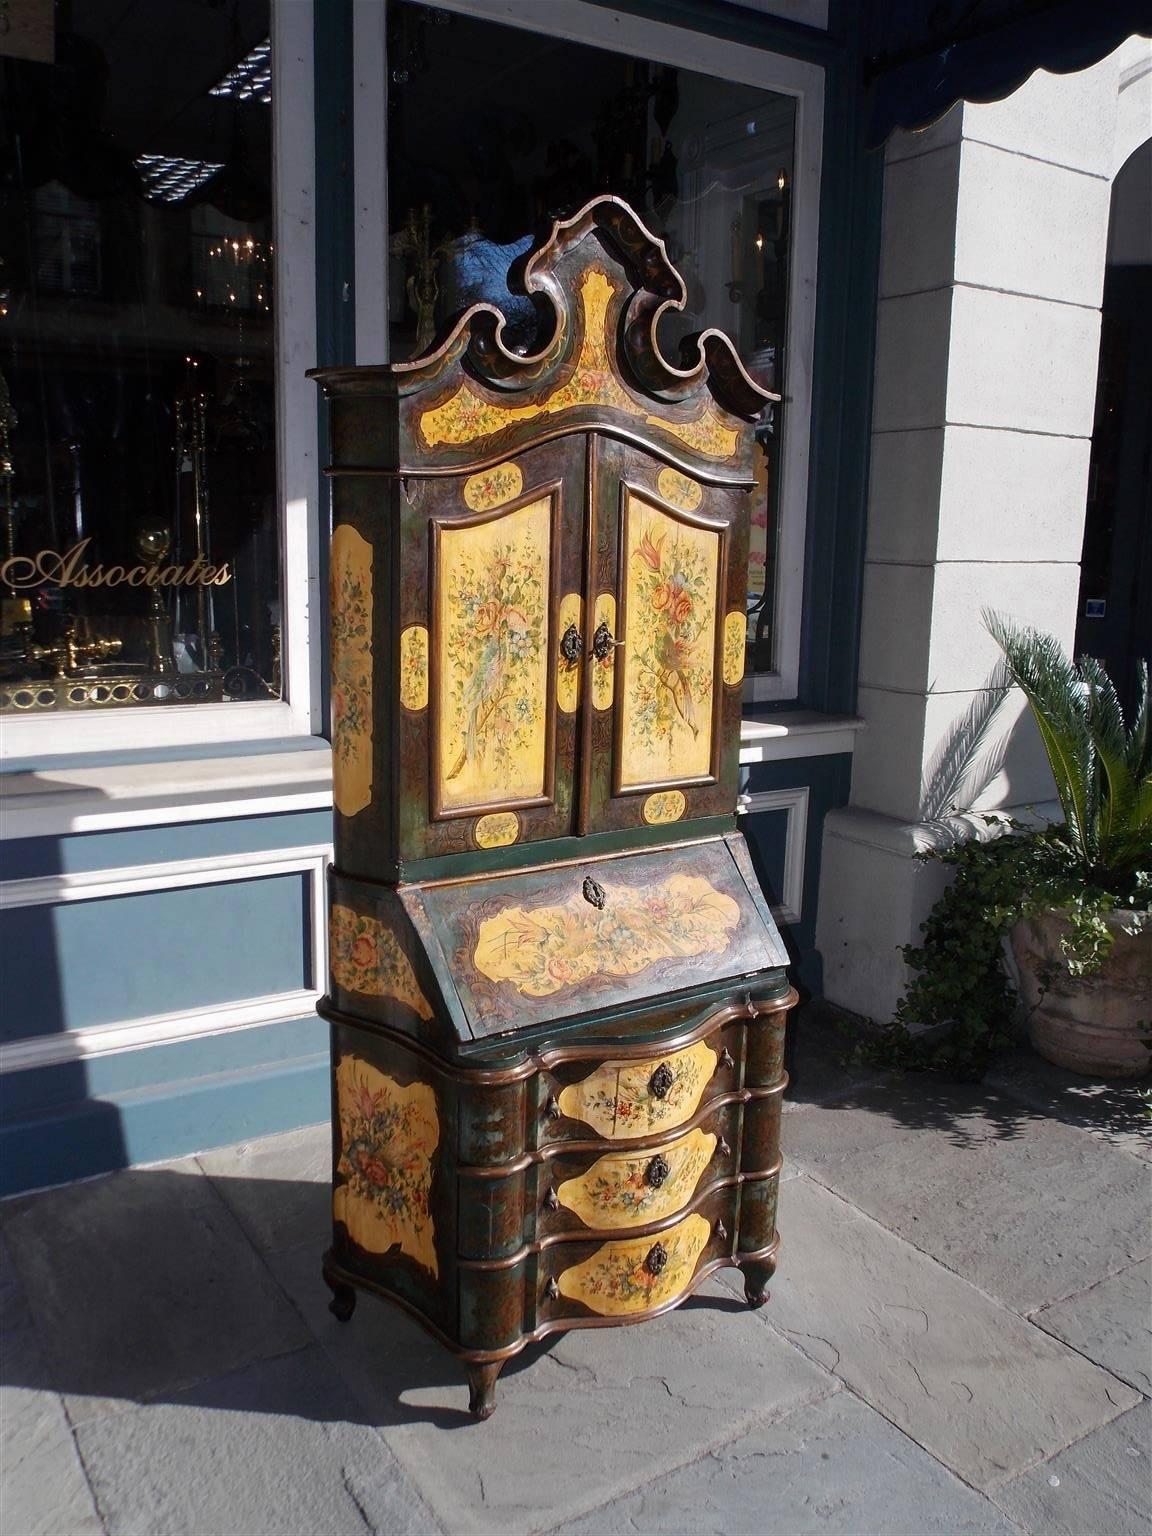 Venetian blind door secretary with a carved scrolled decorative cornice, upper case bookcase with hand-painted parrots and foliage, slant top reveling a fitted interior desk, three lower case drawers with rounded corners, original brasses, and